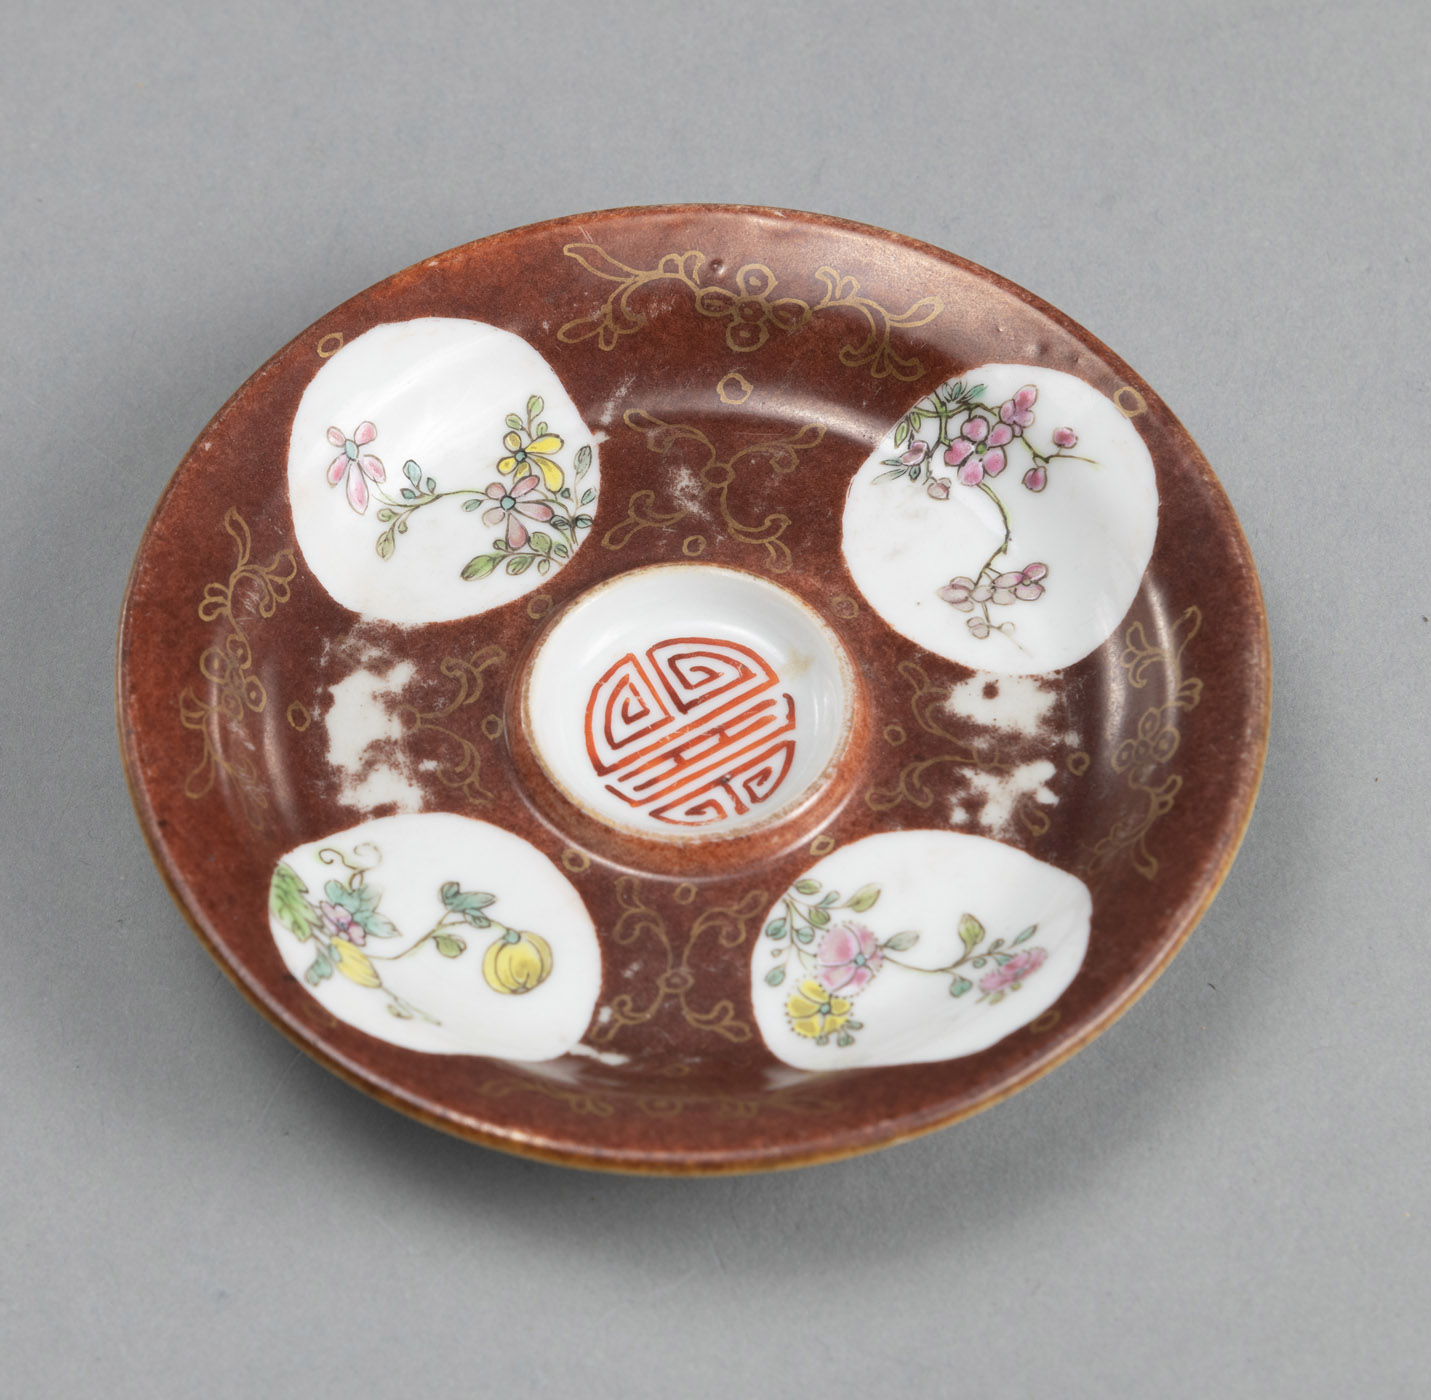 A SMALL REDDISH-BROWN GLAZED SAUCER WITH A 'SHOU' CHARACTER AND FOUR FLORAL MEDALLIONS IN POLYCHROM